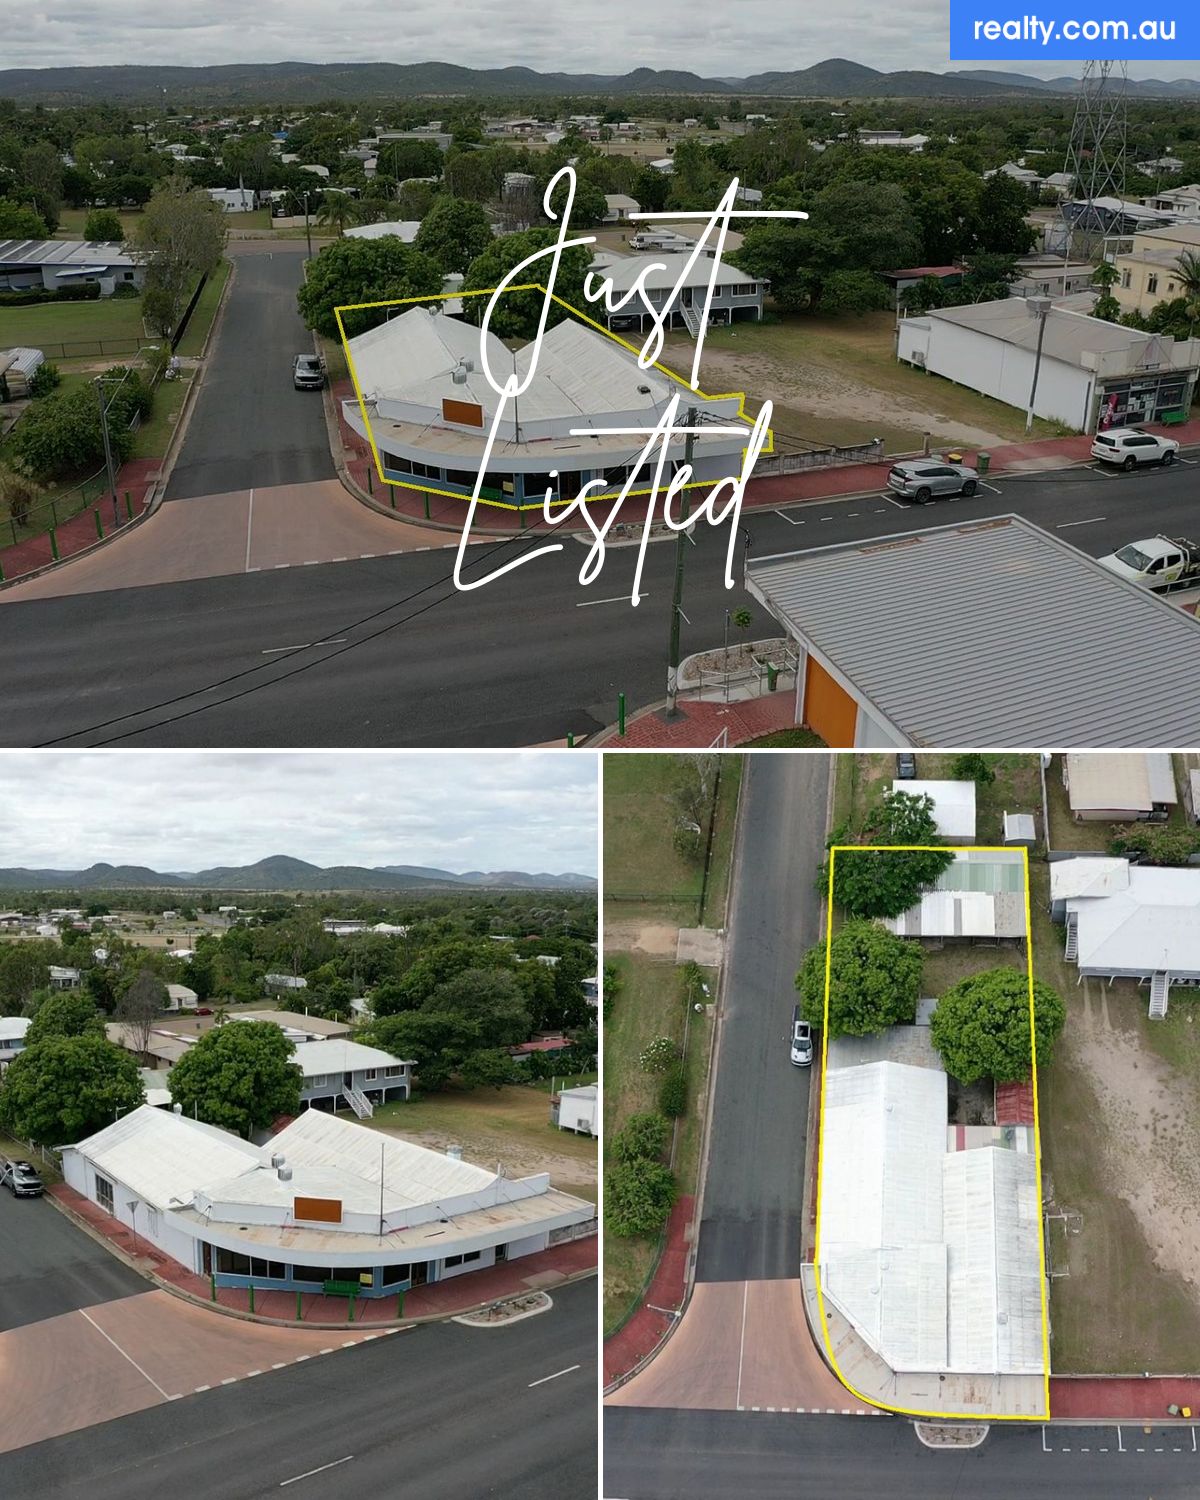 24-26 Stanley Street, Collinsville, QLD 4804 | Realty.com.au